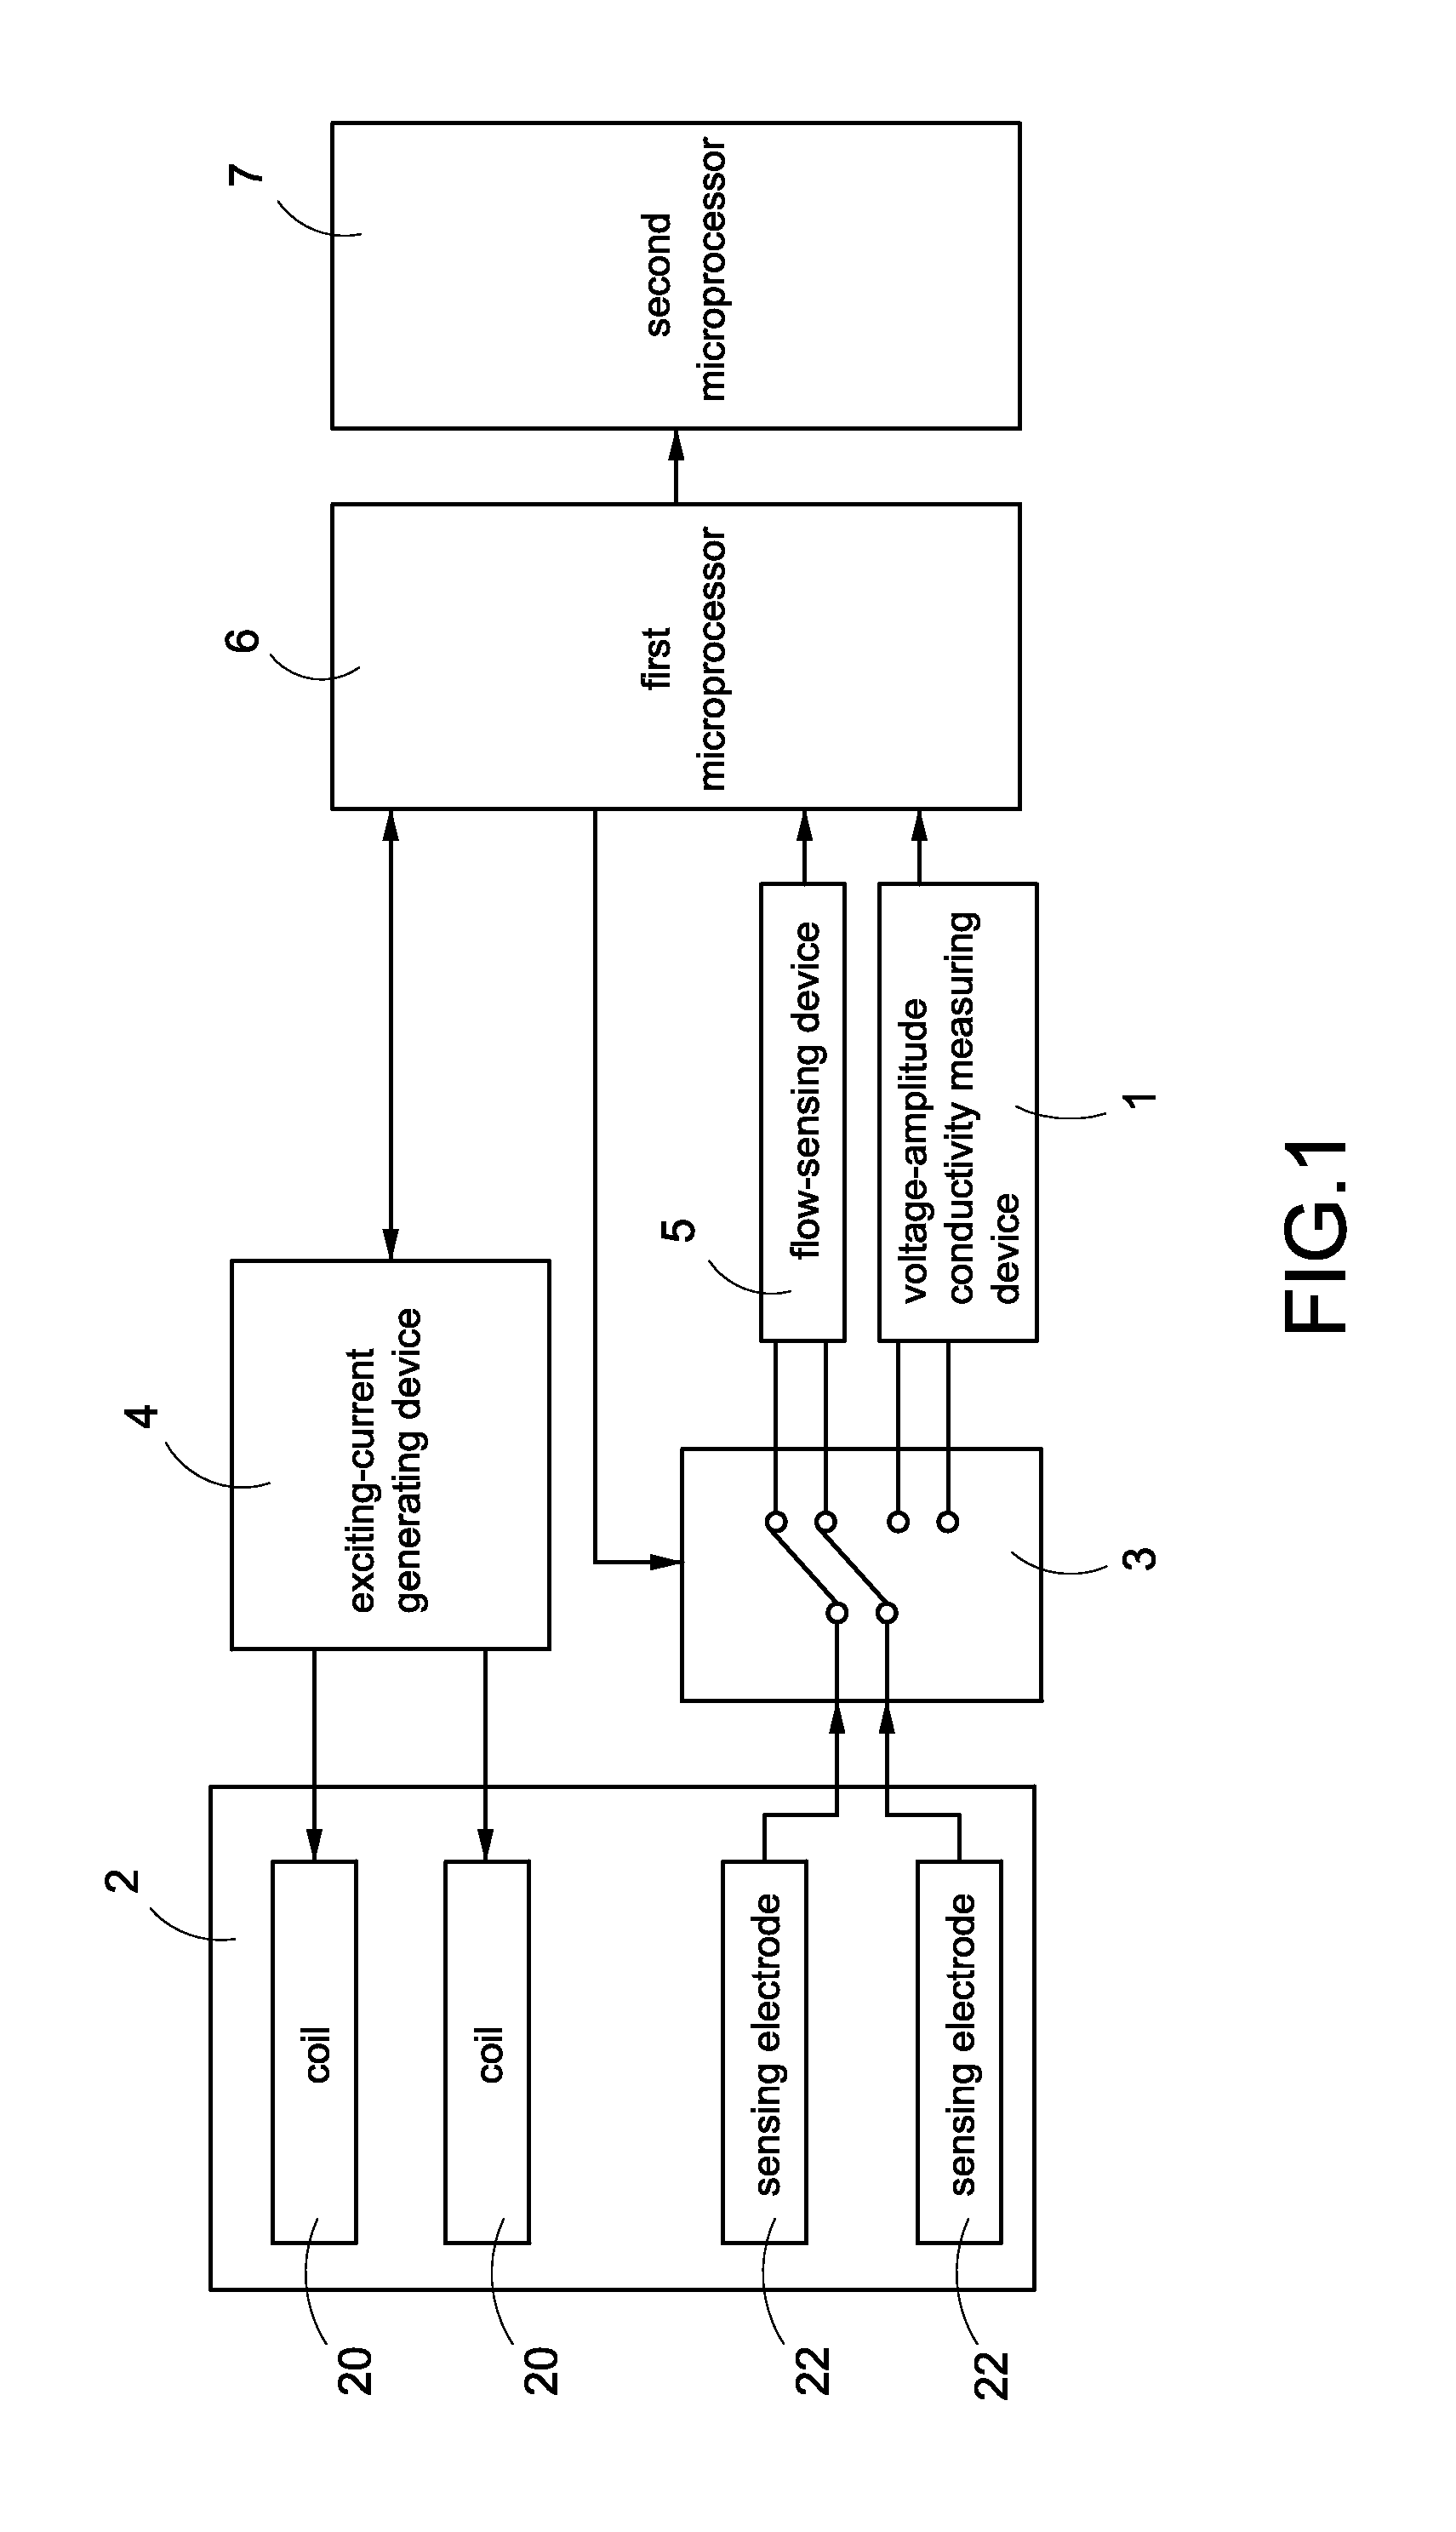 Electromagnetic flowmeter with voltage-amplitude conductivity-sensing function for a liquid in a tube